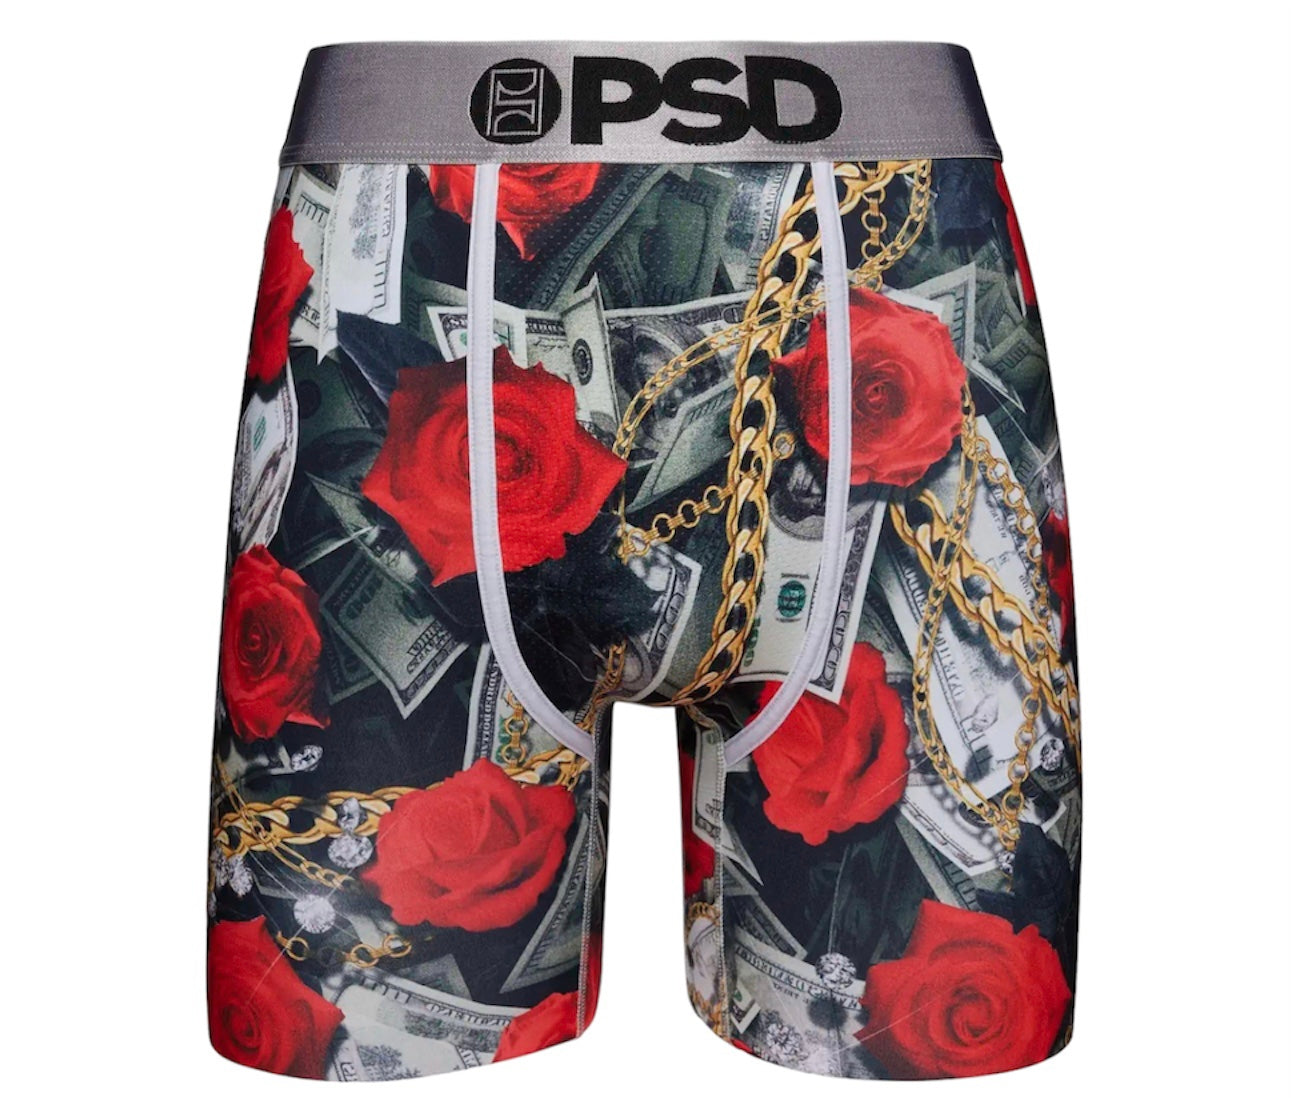 PSD Slither Rose Stretch Boxer Briefs - Men's Boxers in Multi